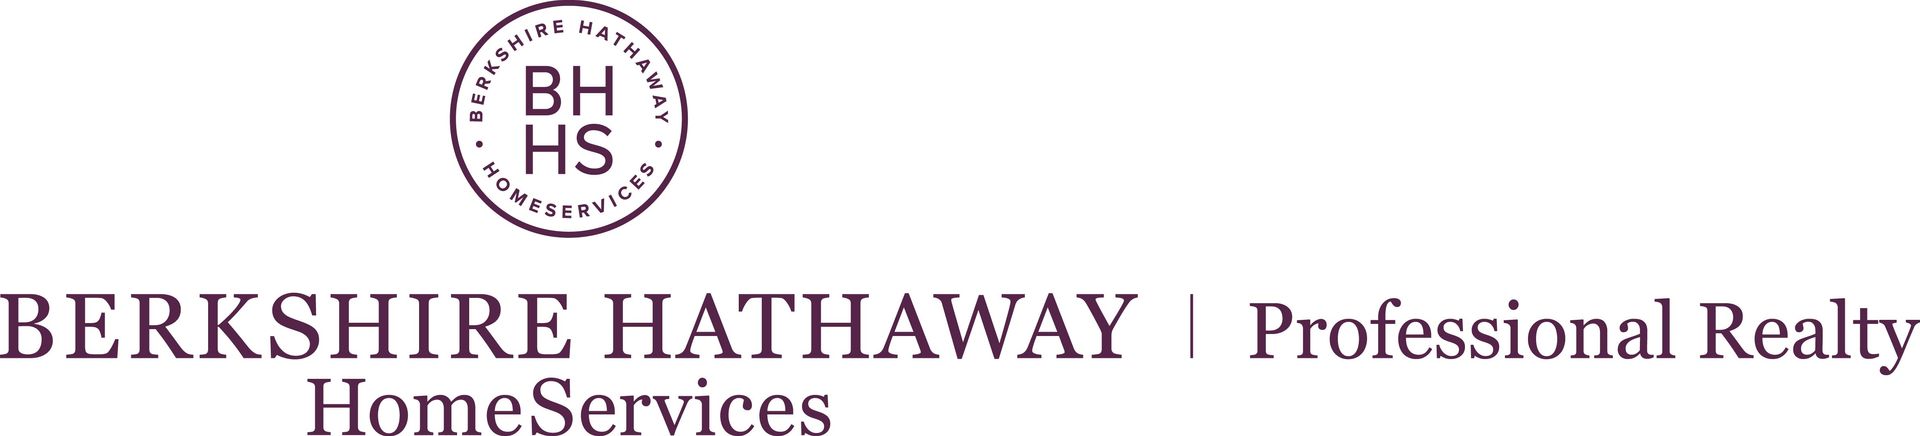 Berkshire Hathaway HomeServices Professional Realty logo